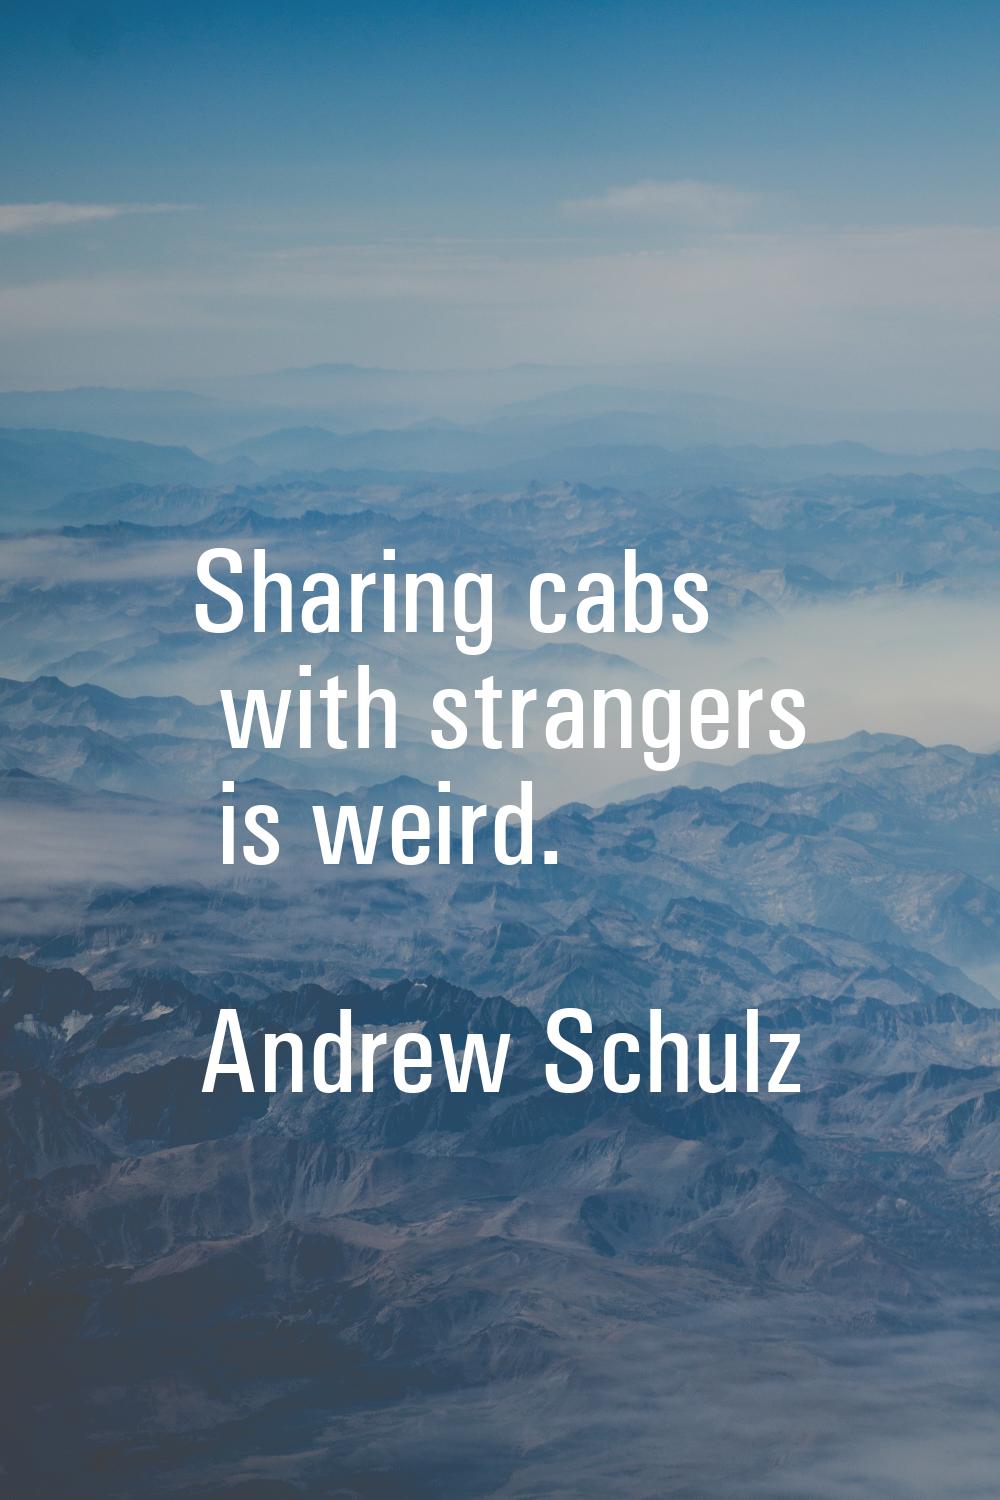 Sharing cabs with strangers is weird.